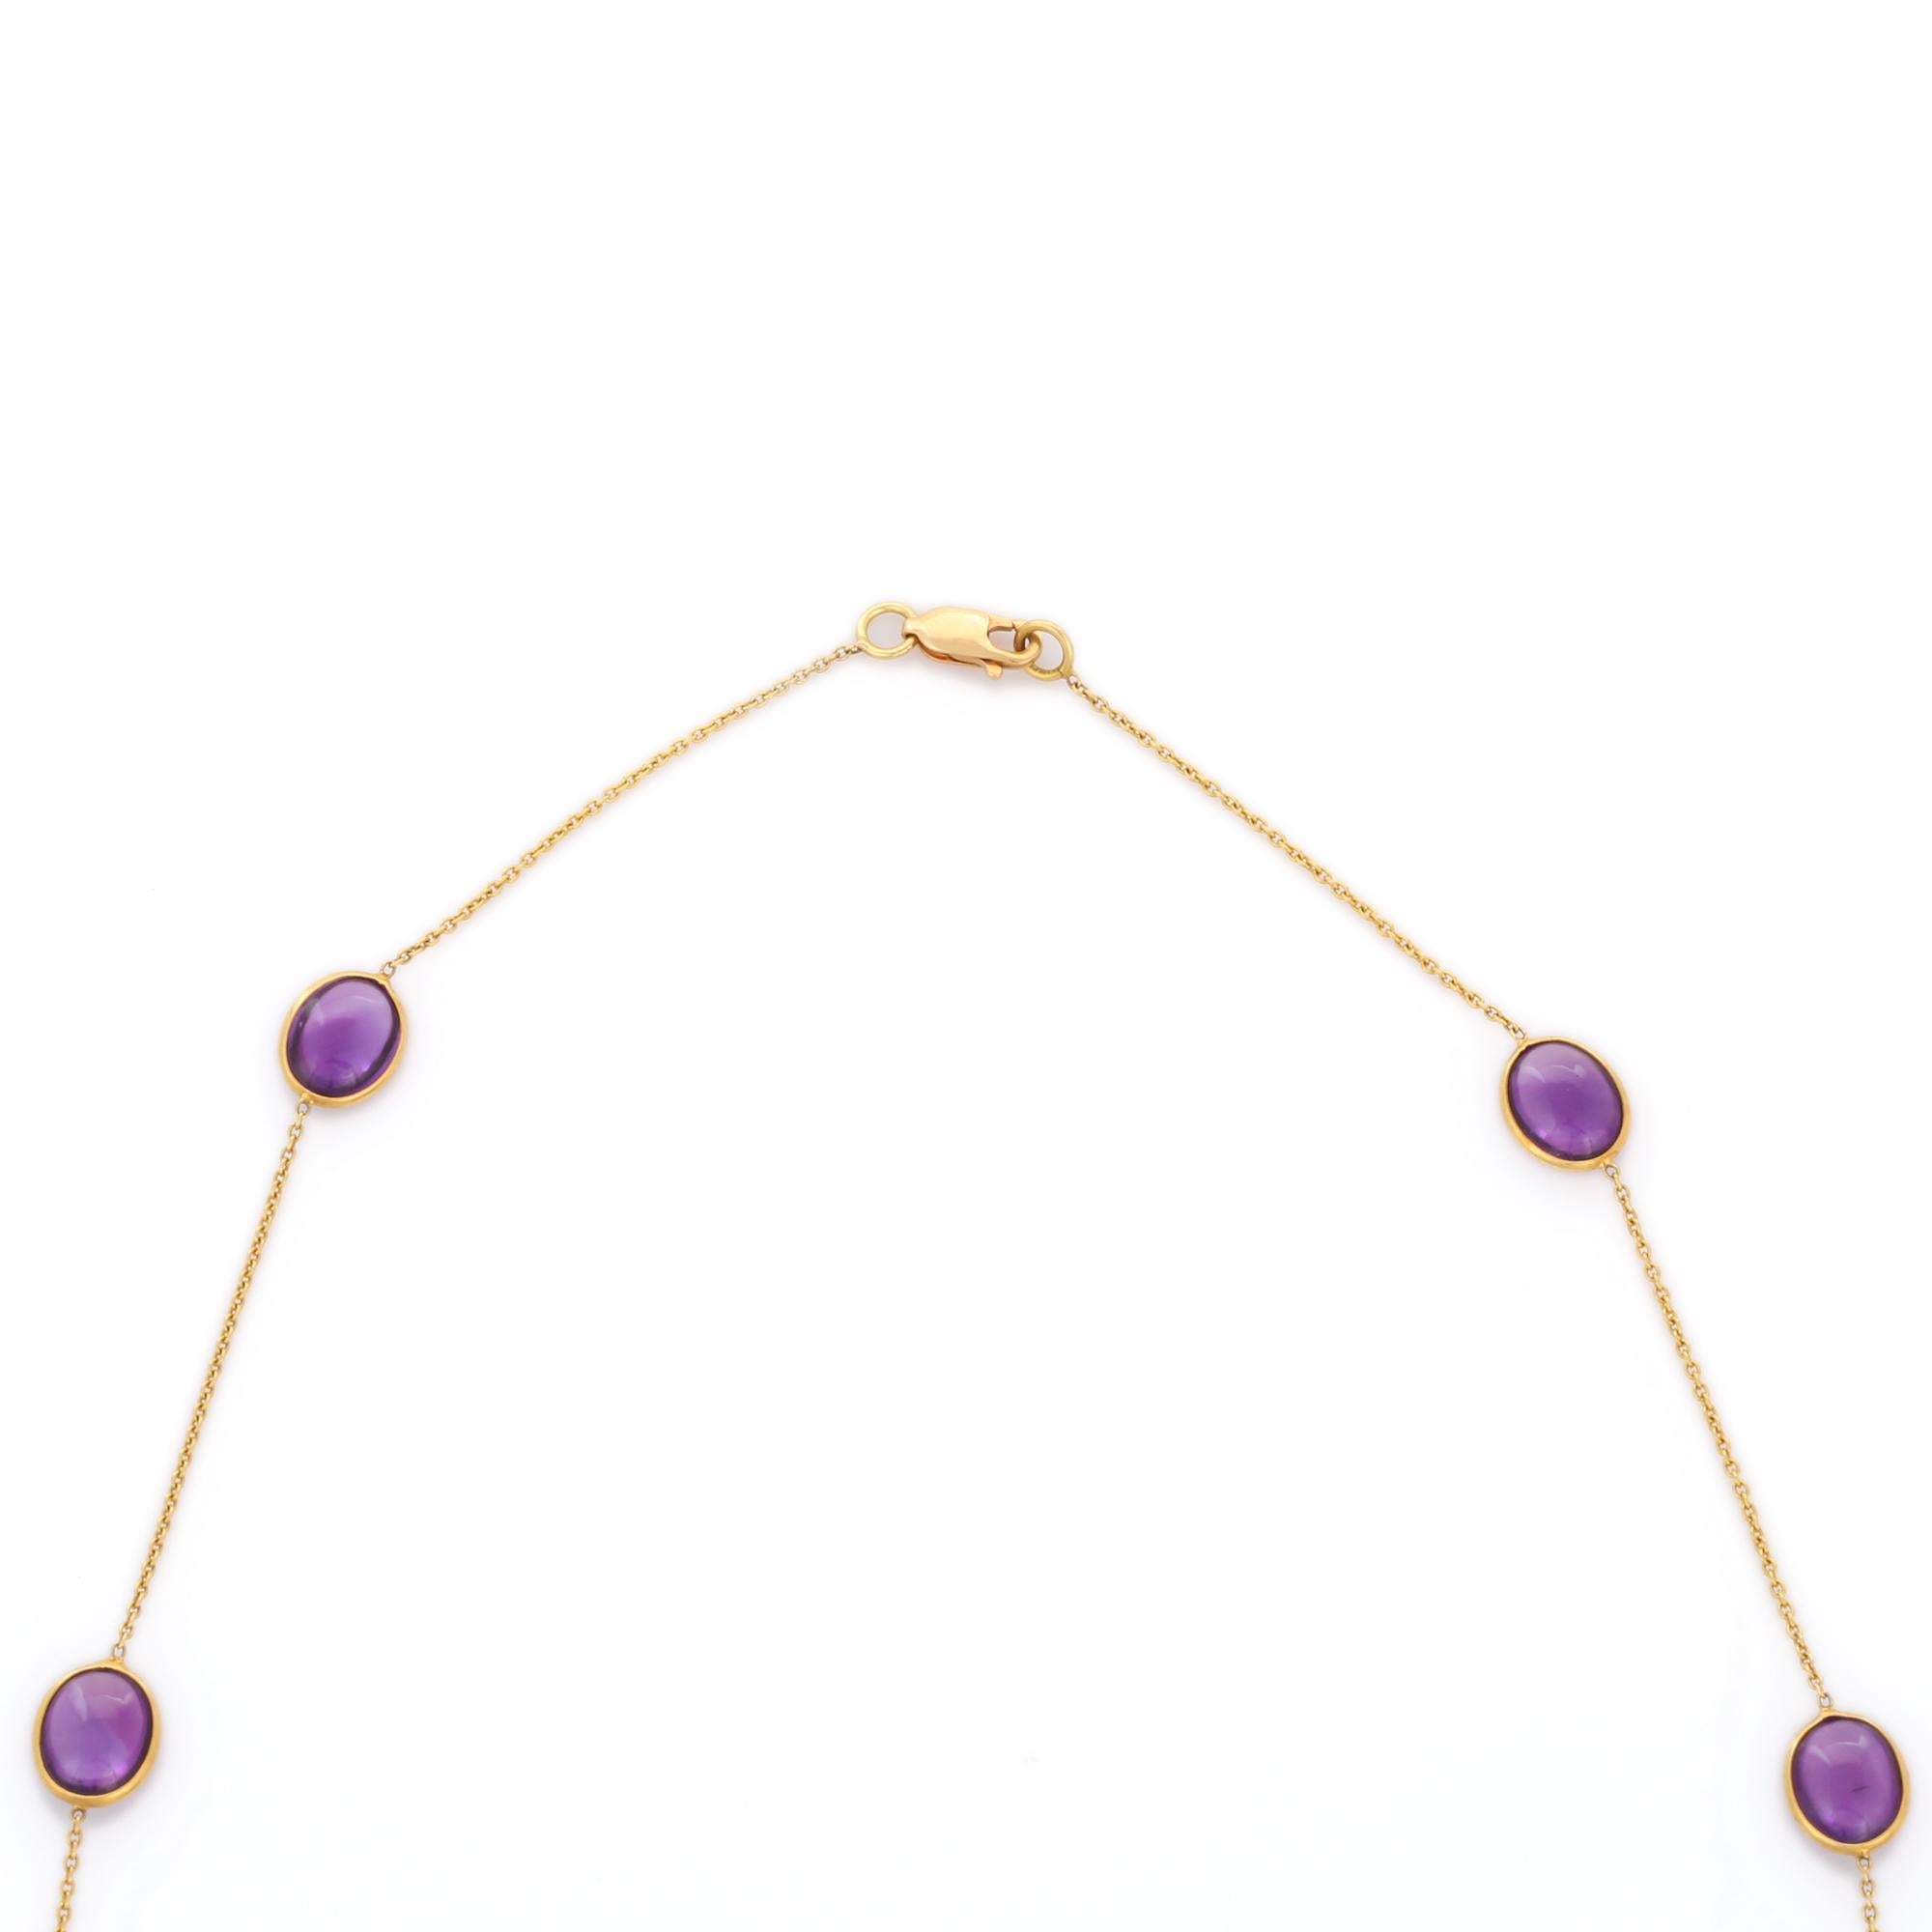 Oval Cut Modern 25.5 Ct Oval Amethyst Chain Necklace Enhancer in 18K Yellow Gold For Sale